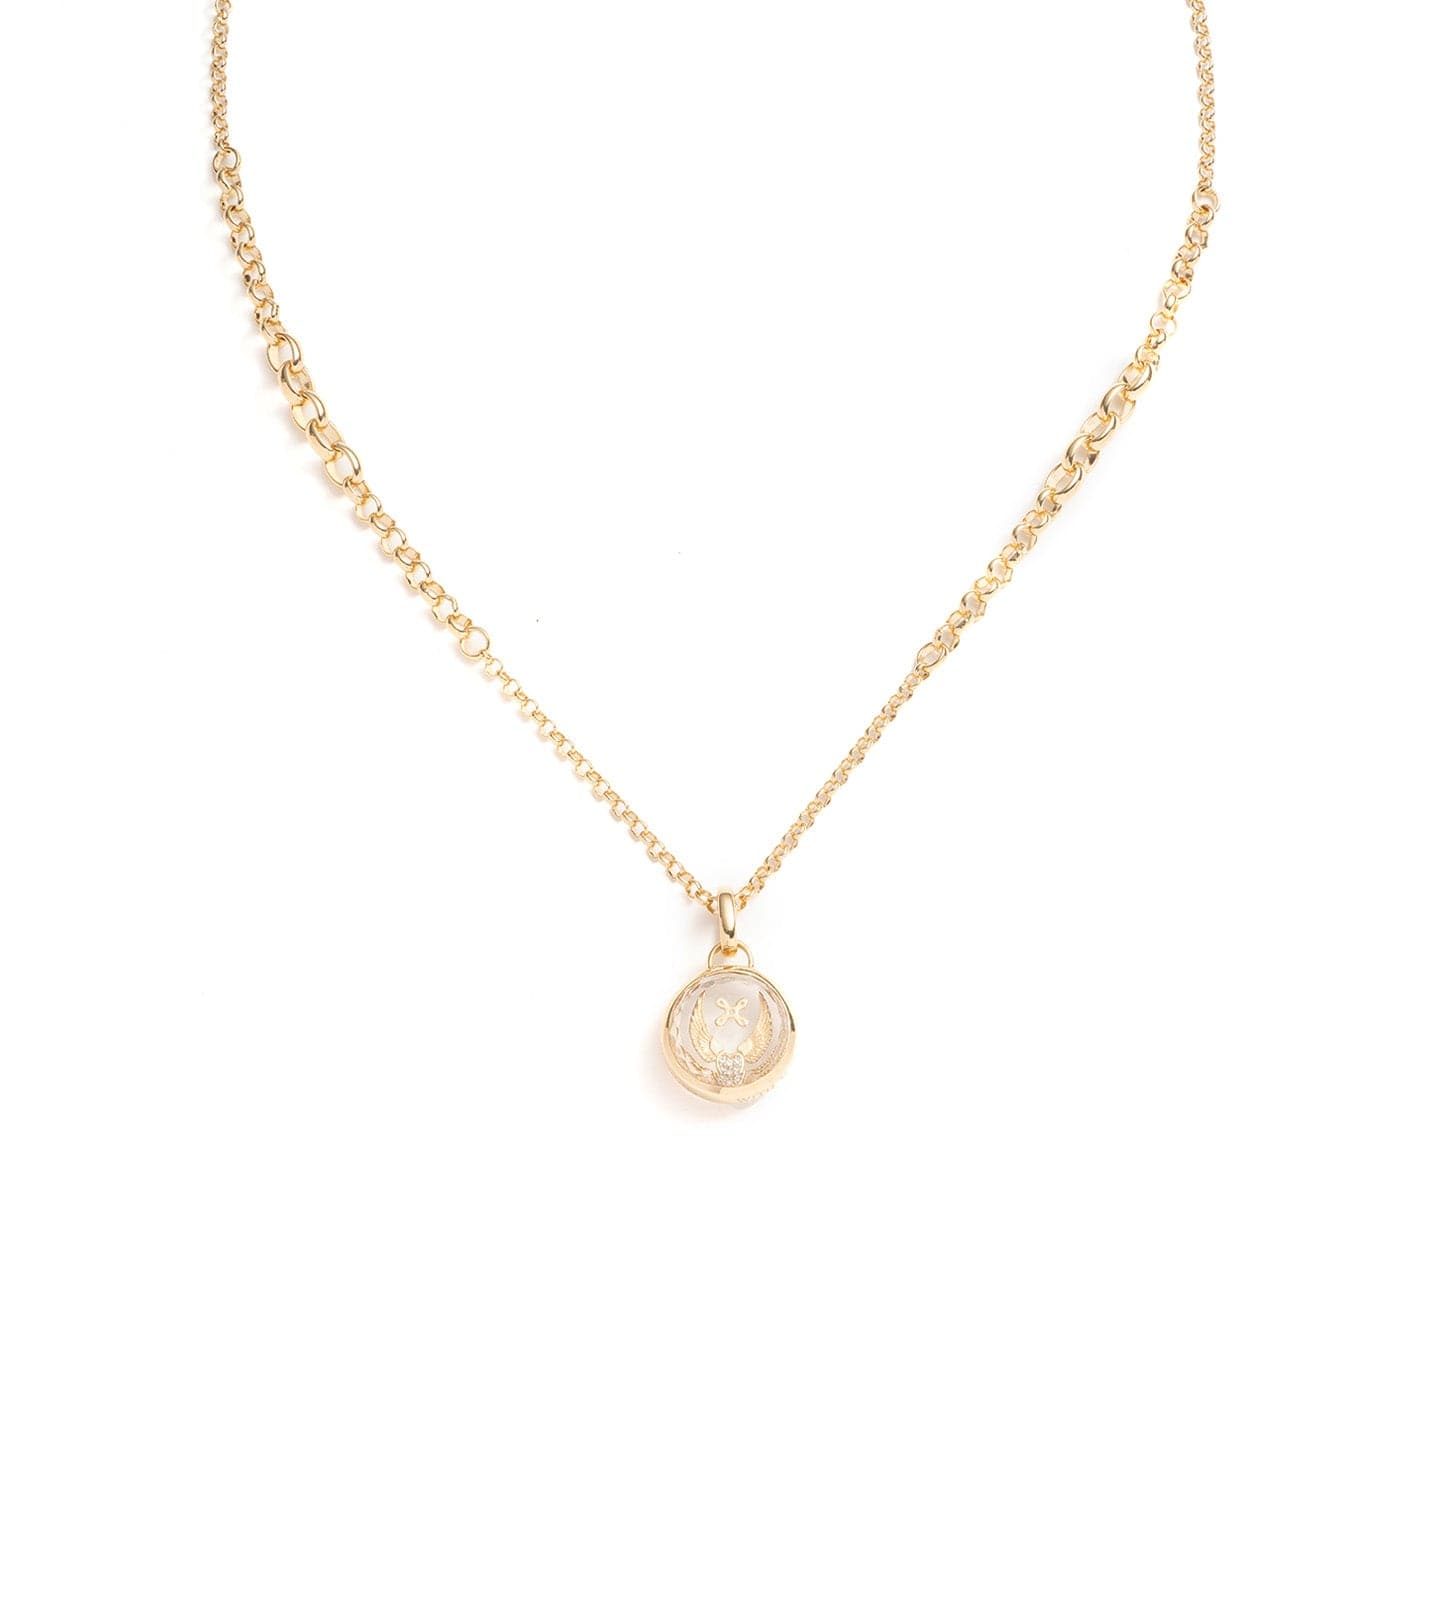 18K Yellow Gold Pear & Pave Chain Necklace & Medallion with